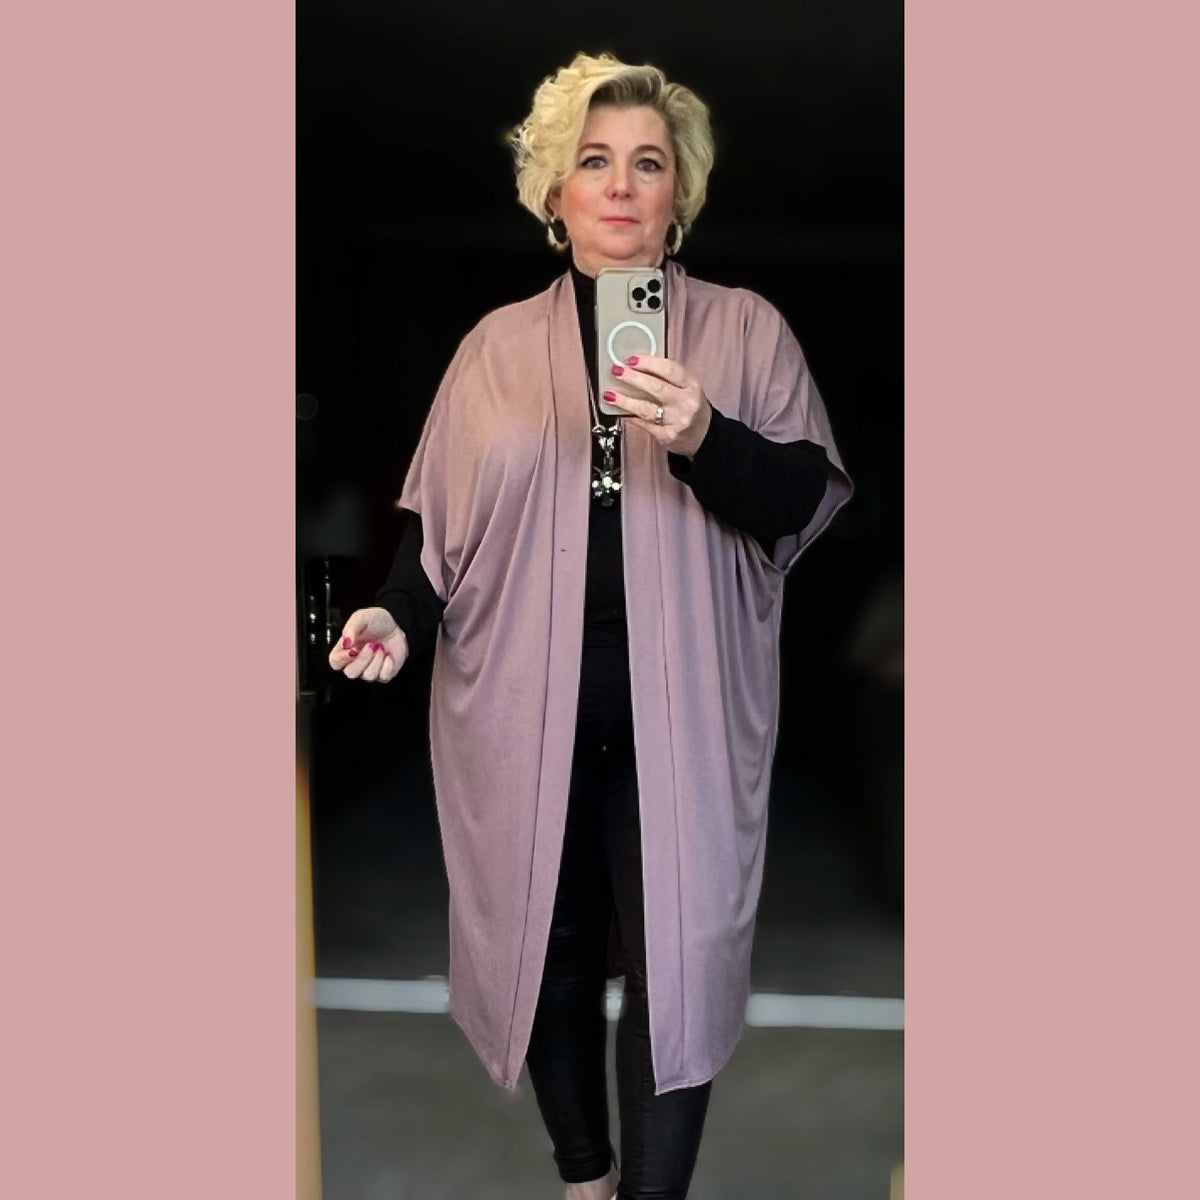 Drop Sleeve Long length Duster Jacket with pockets